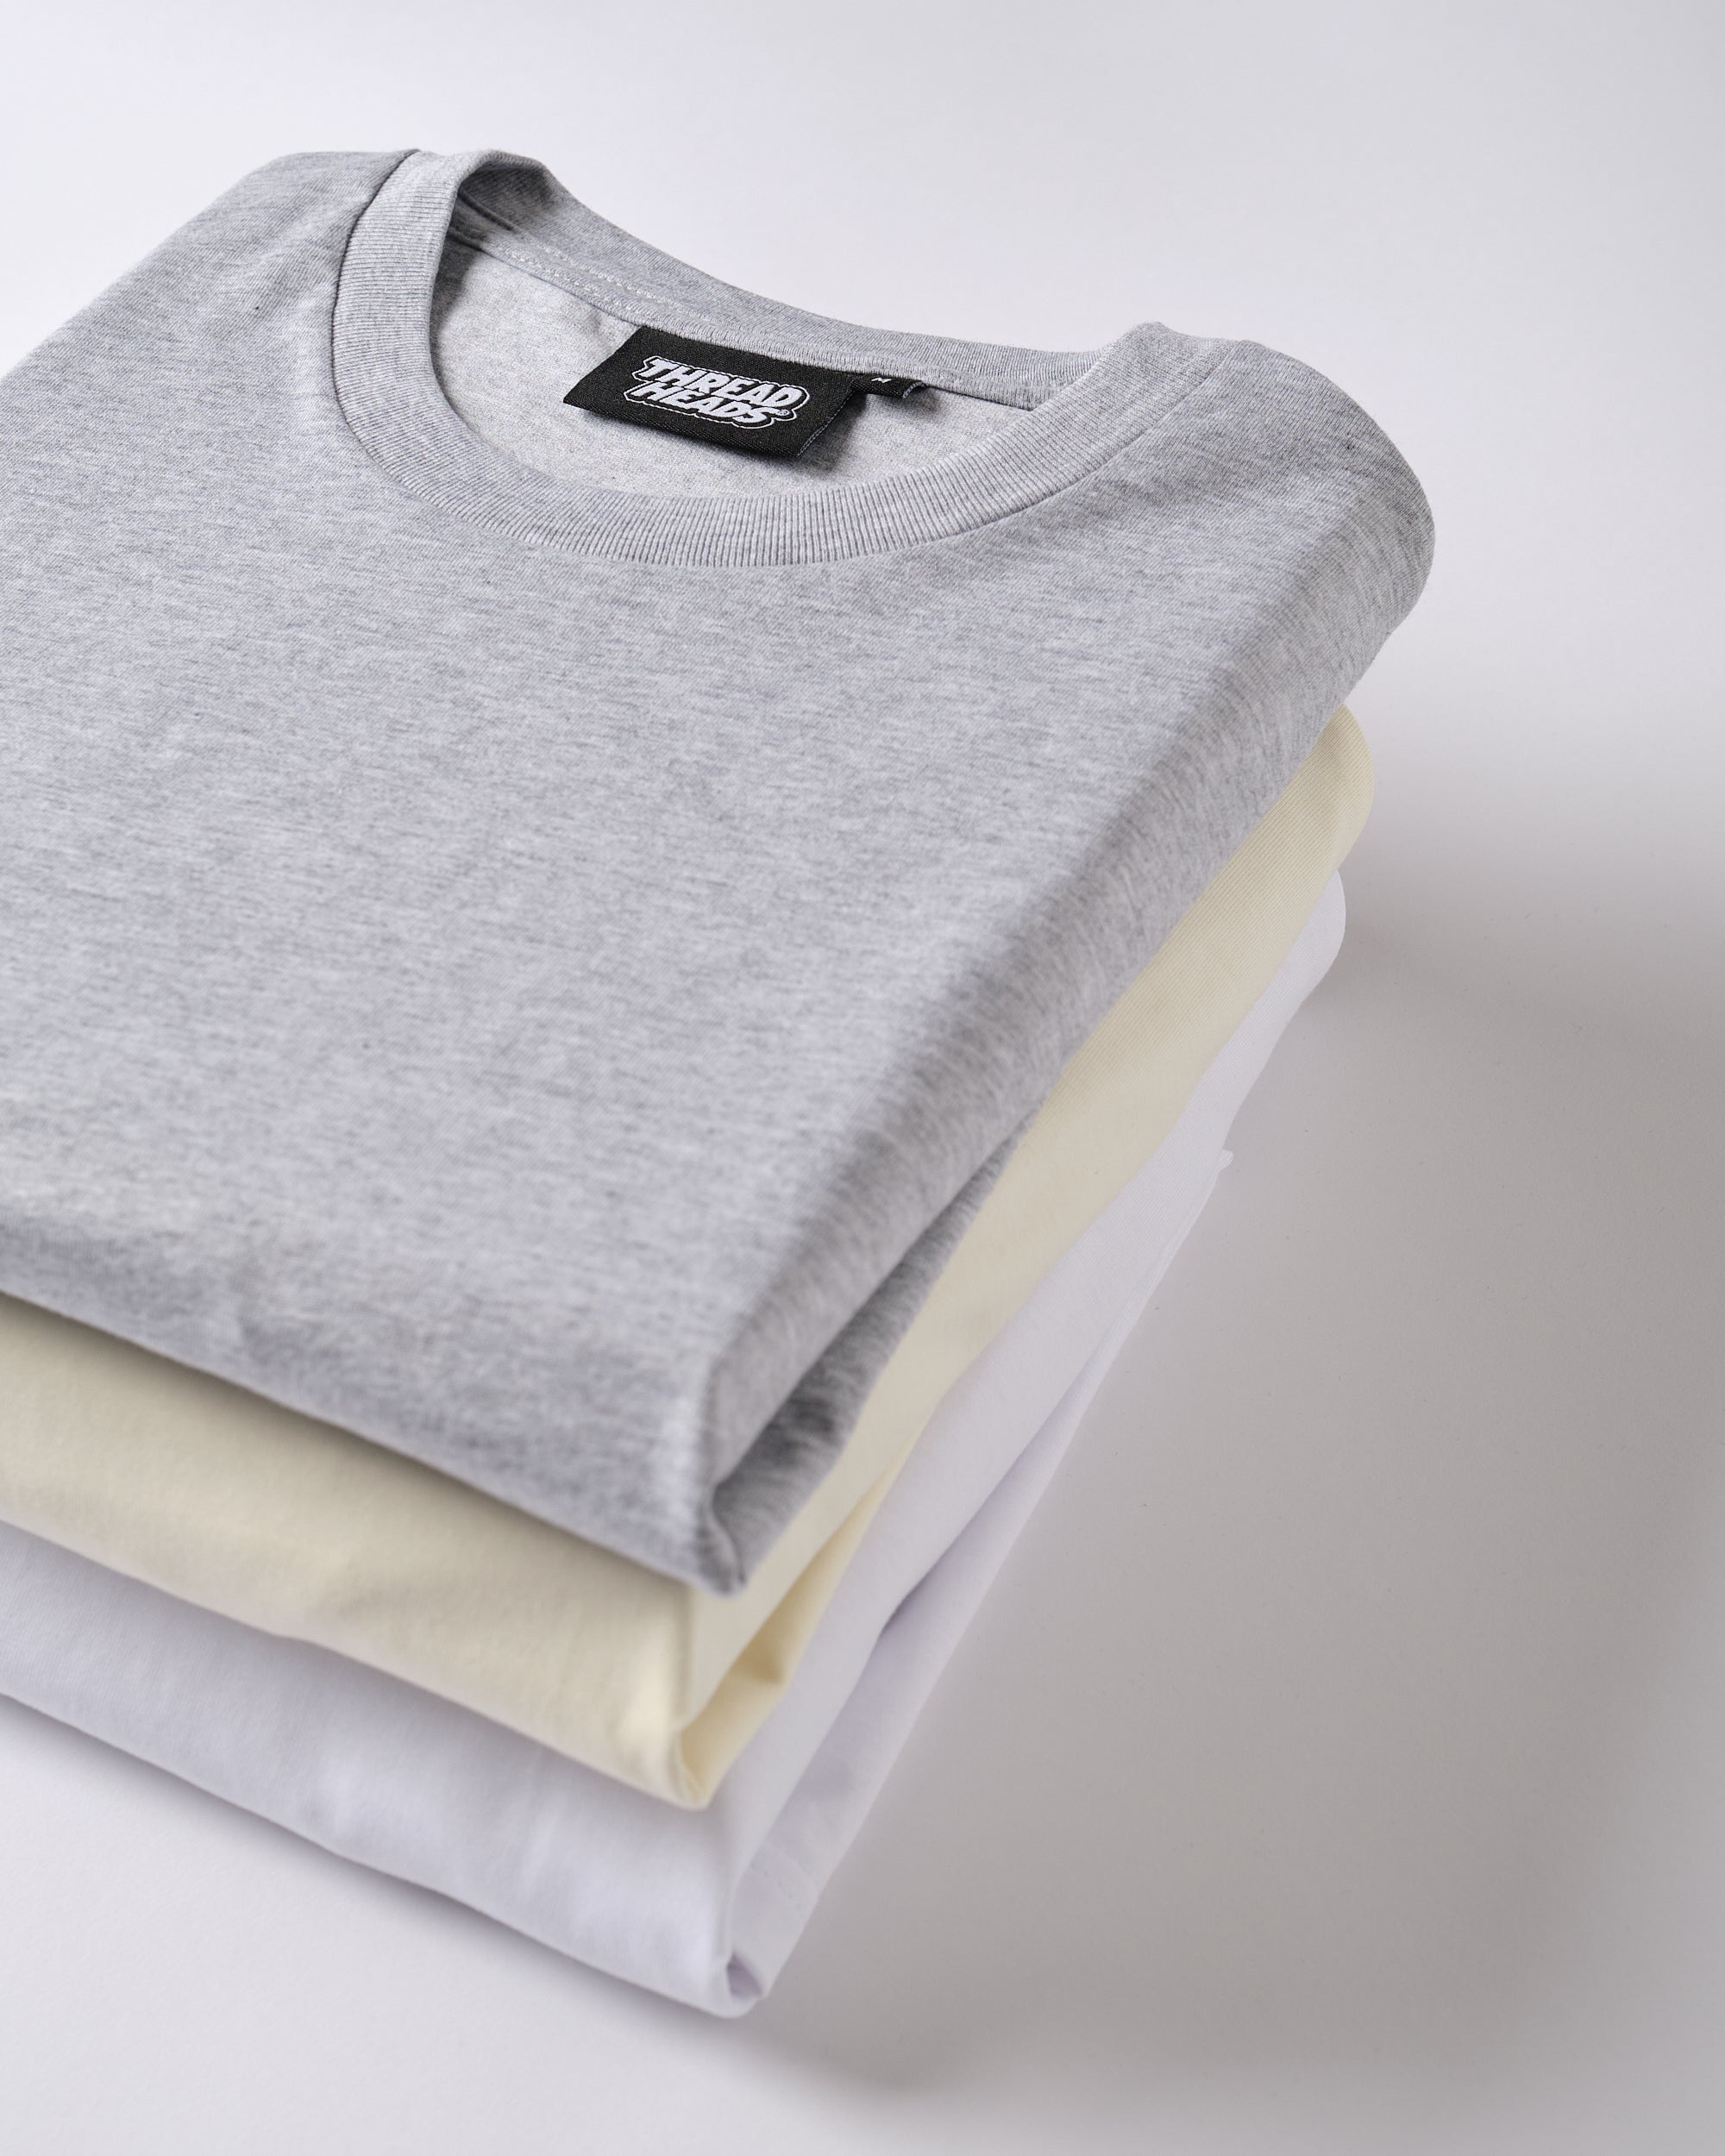 Classic Tee 3-Pack: Grey, Natural, White